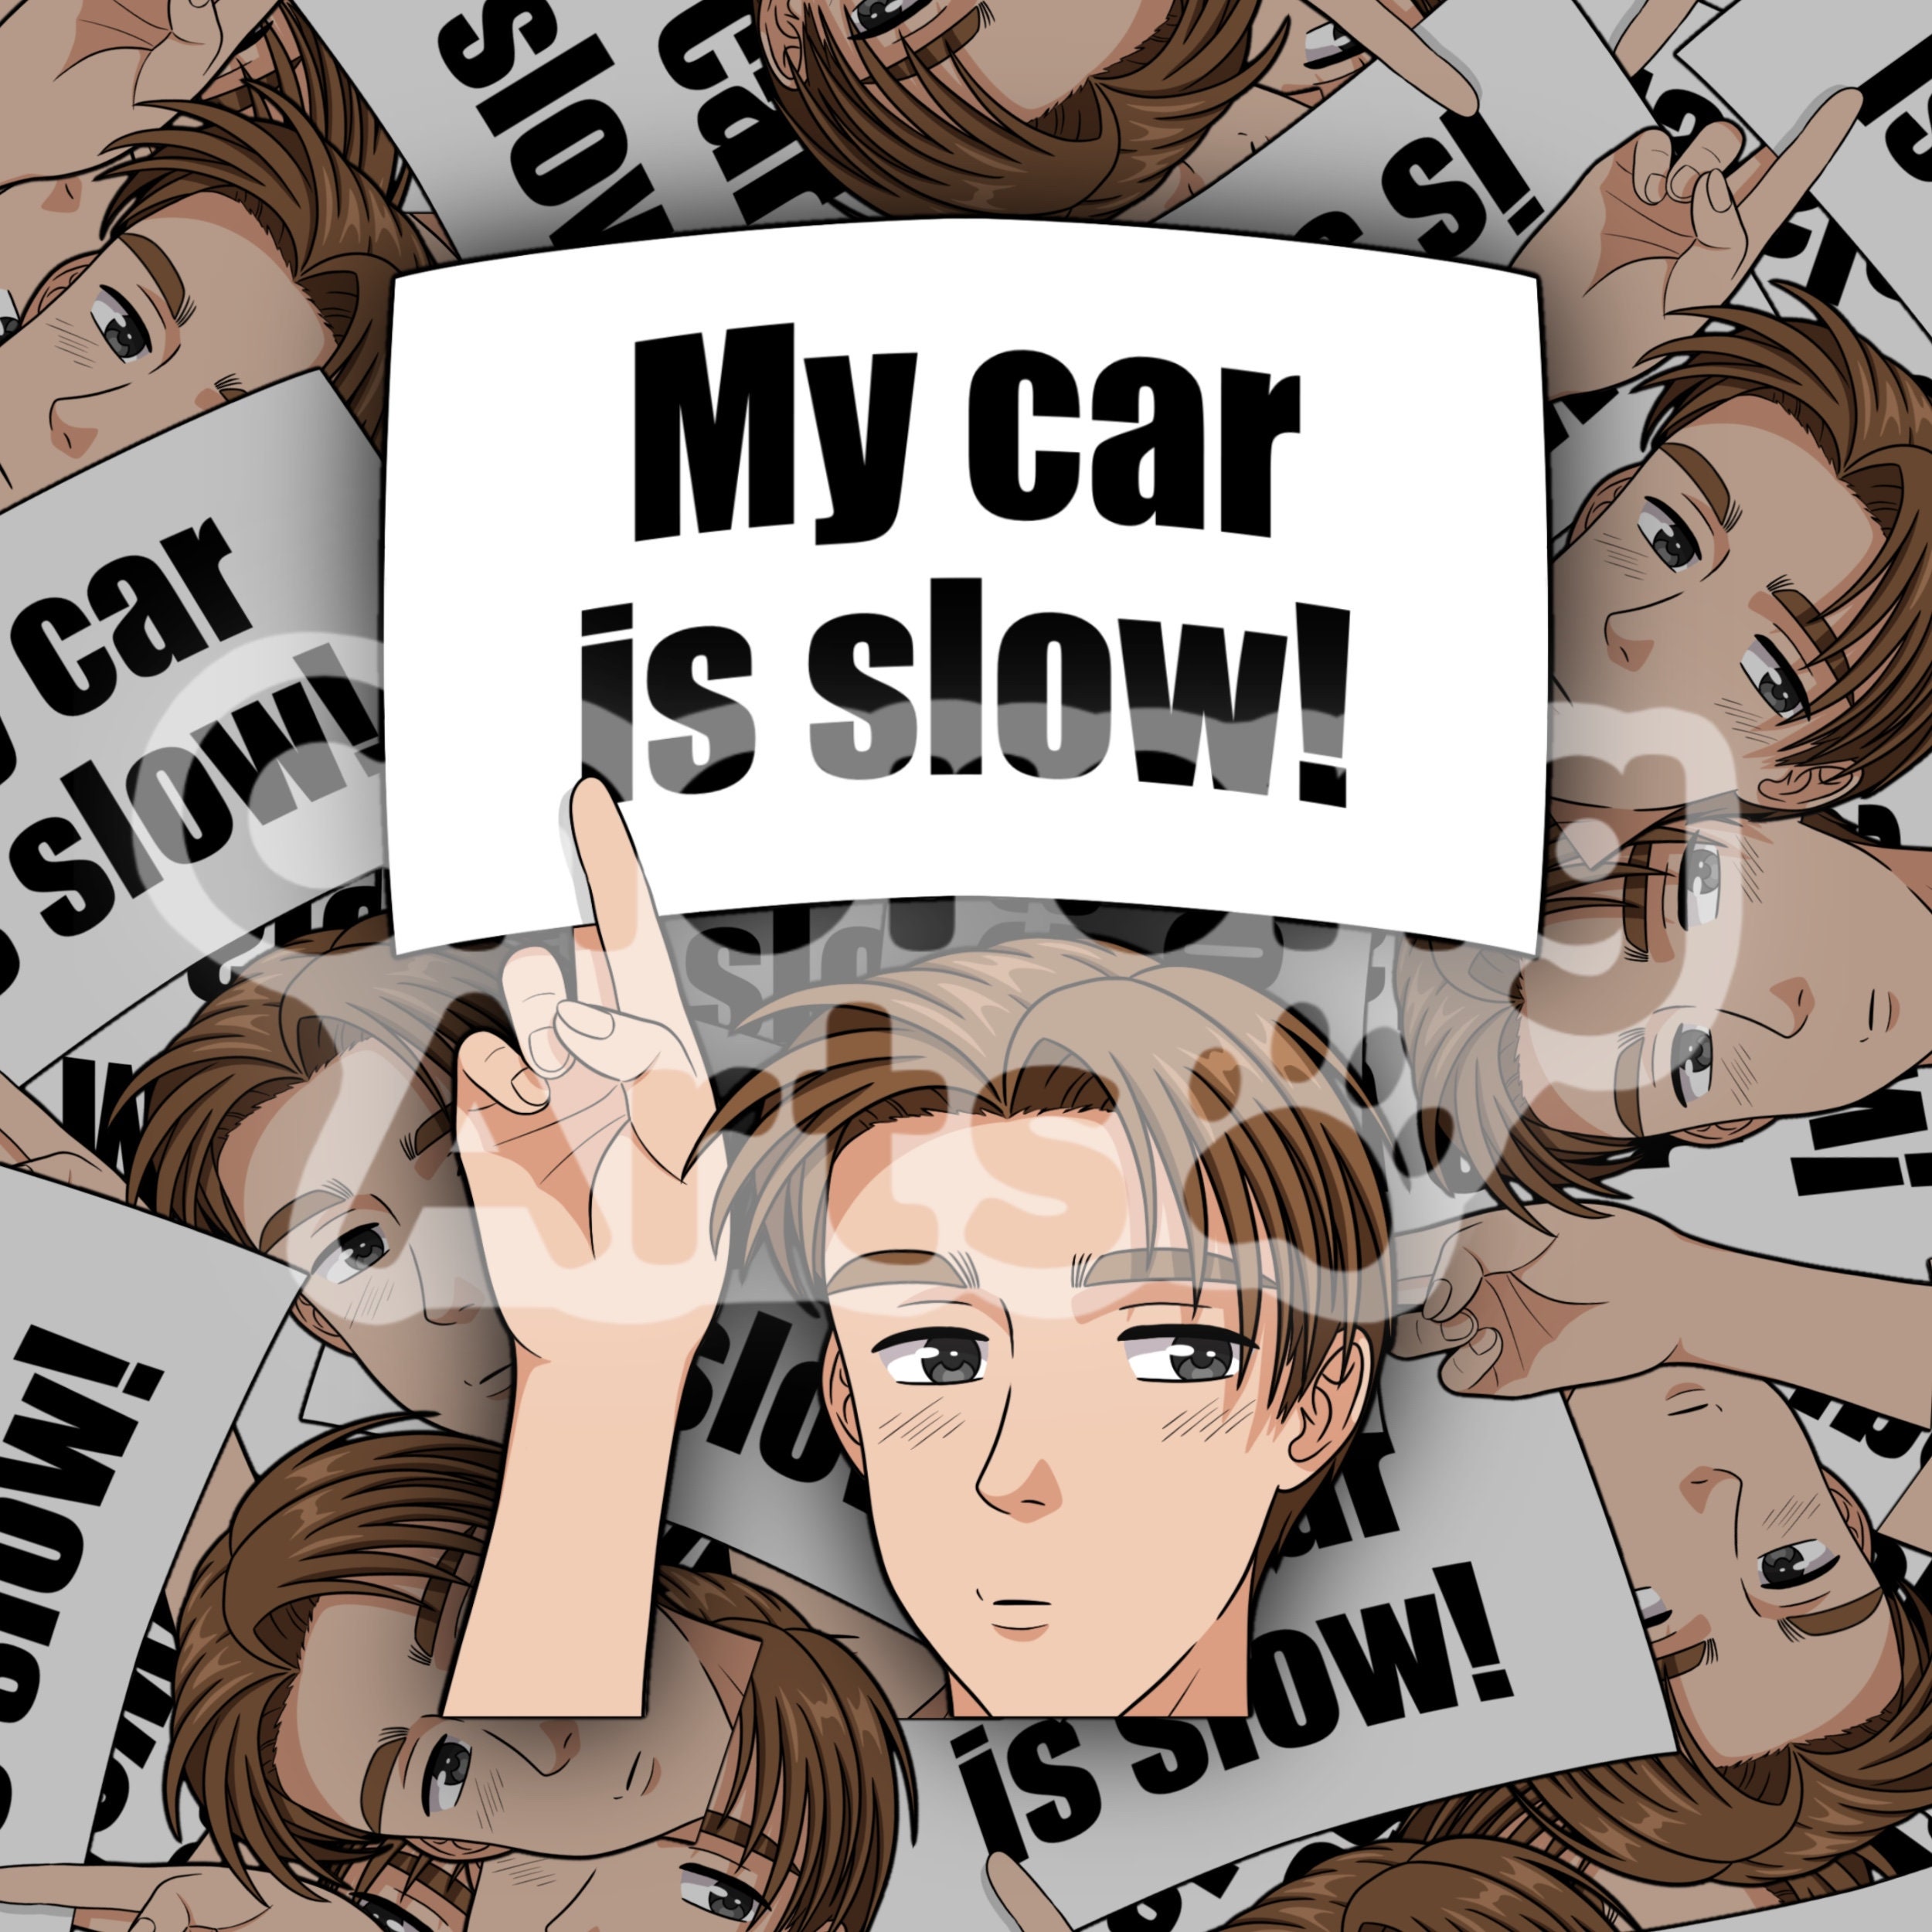 Initial D: How A Silly Cartoon Changed My Life - Speedhunters